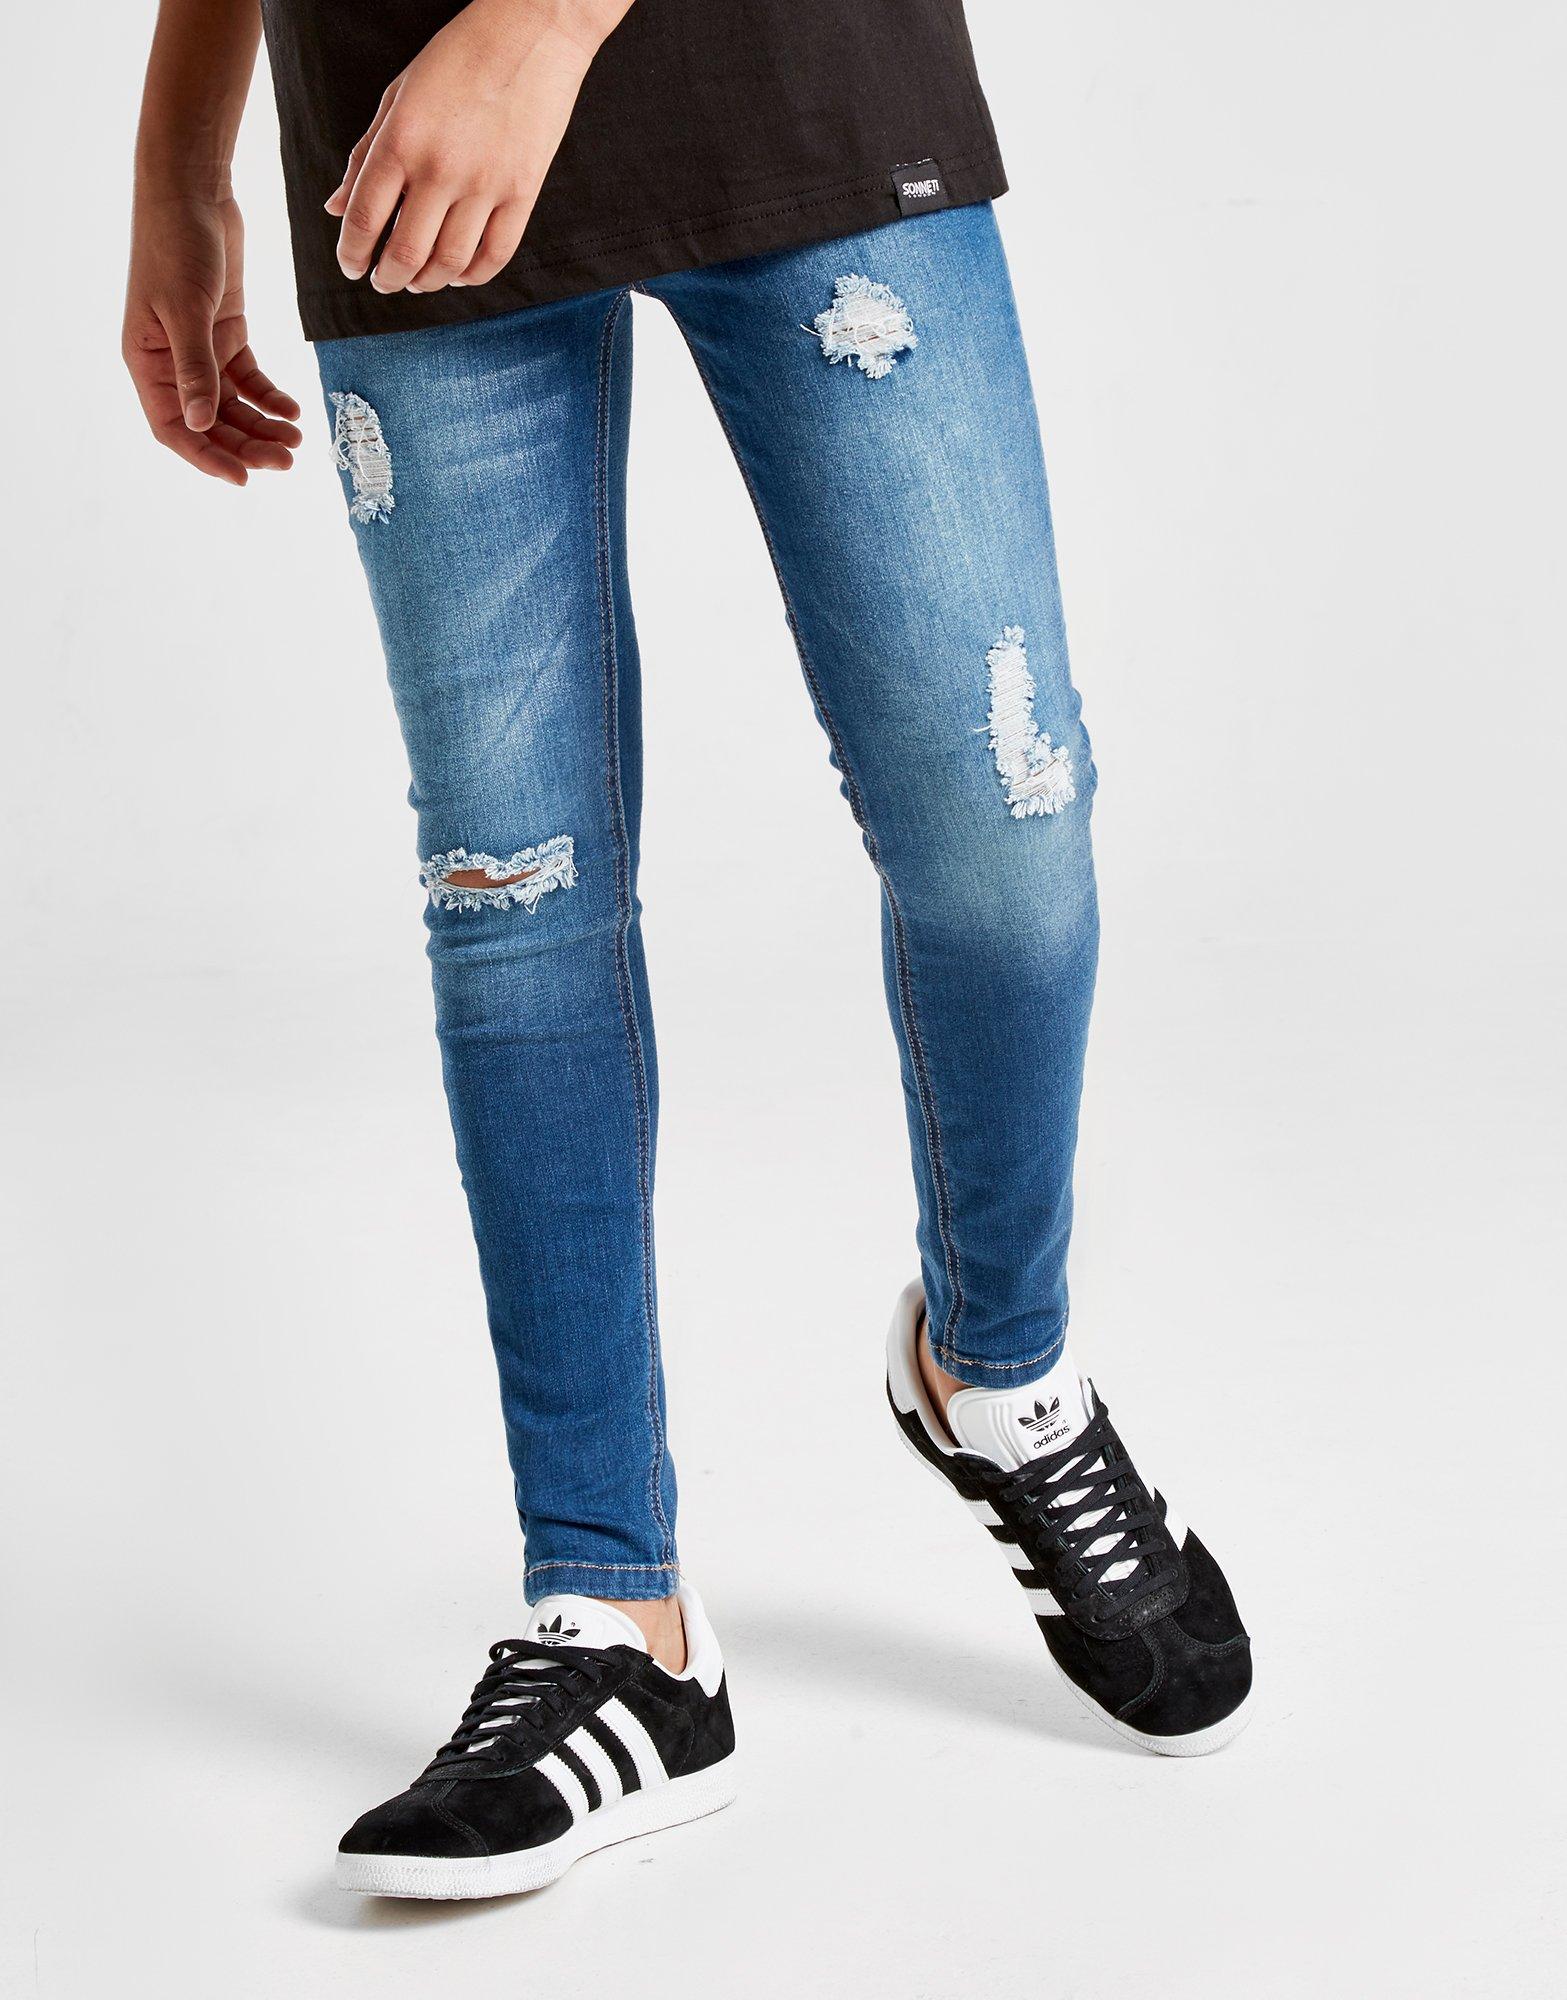 sonneti ripped jeans